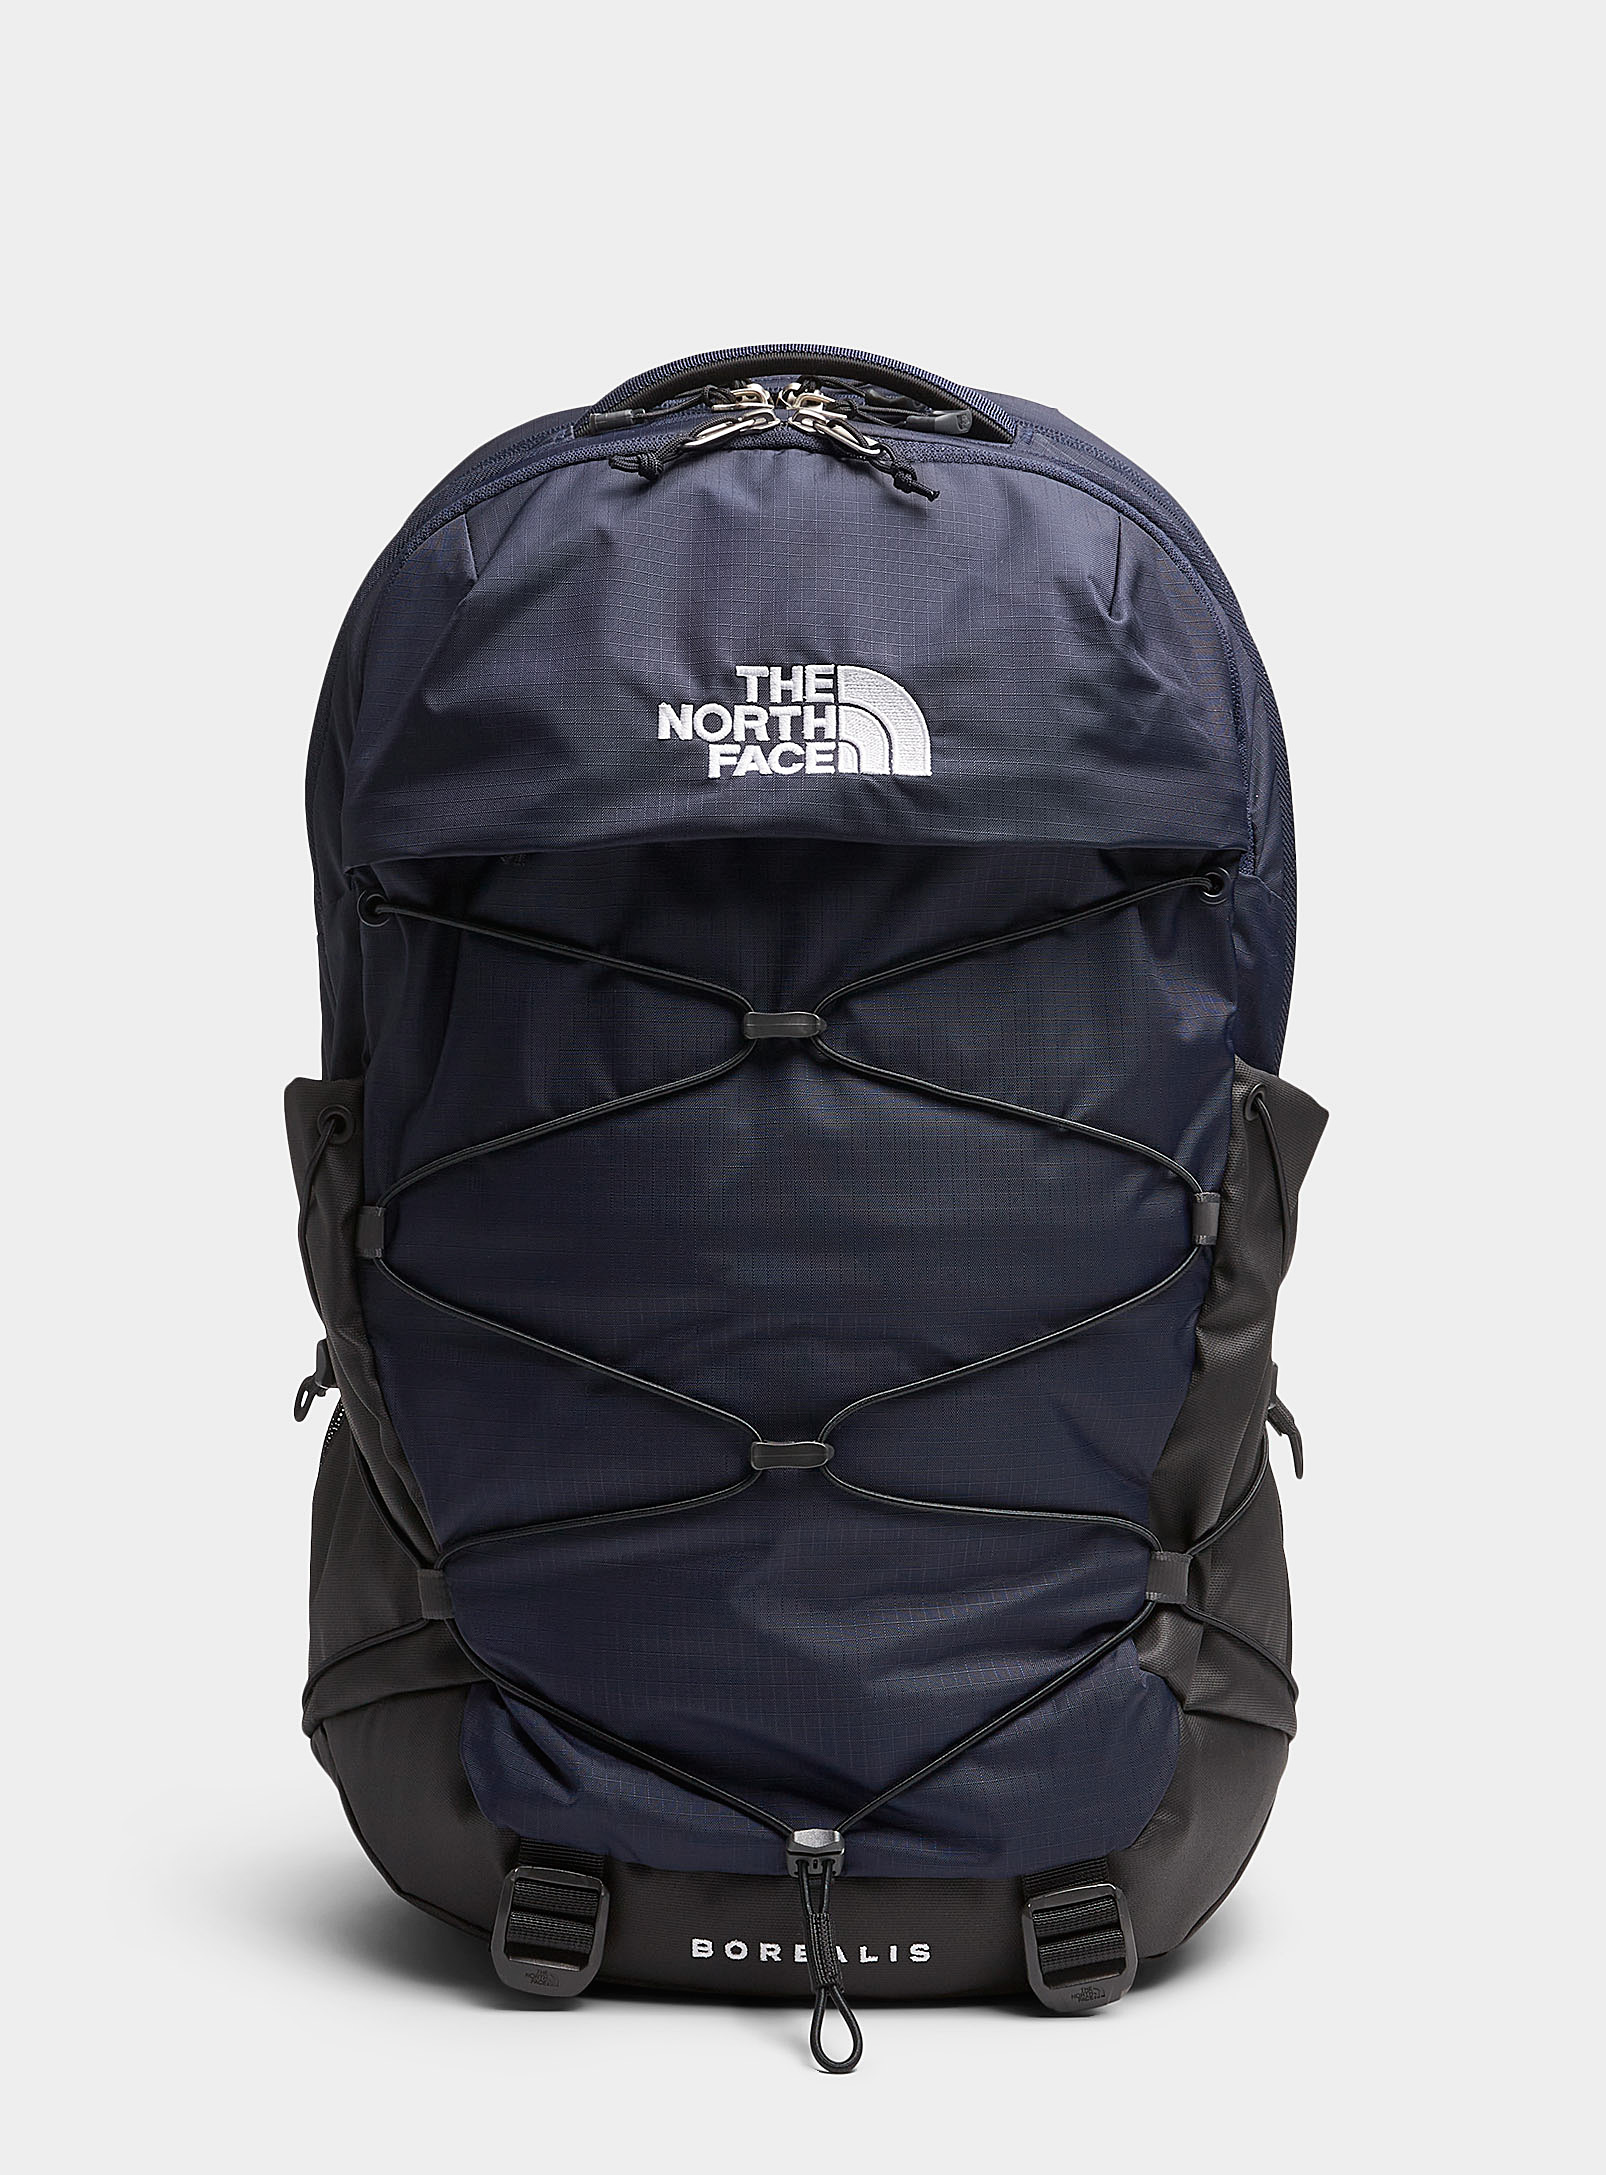 The North Face - Men's Borealis backpack